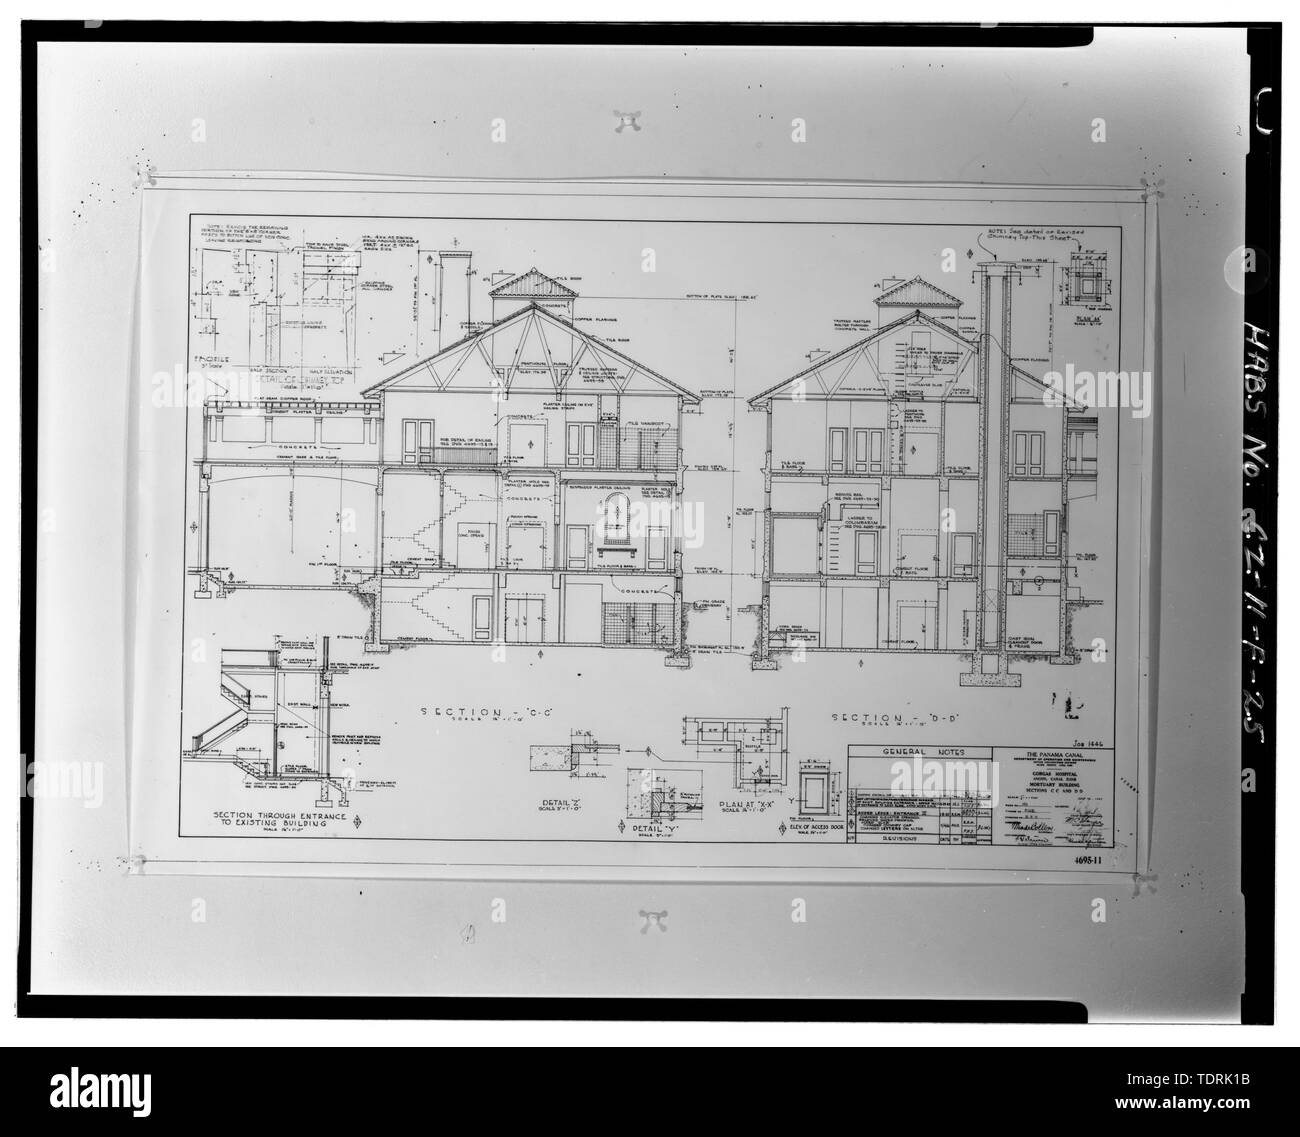 Photographic copy of architectural drawing no. 4695-11 dated 1941 on file at the Engineering and Planning Office, Panama Canal Commission, Balboa, Republic and Panama. Cross sections C-C and D-D. - Gorgas Hospital, Mortuary and Chapel, Gorgas Road, Balboa Heights, Former Panama Canal Zone, CZ Stock Photo